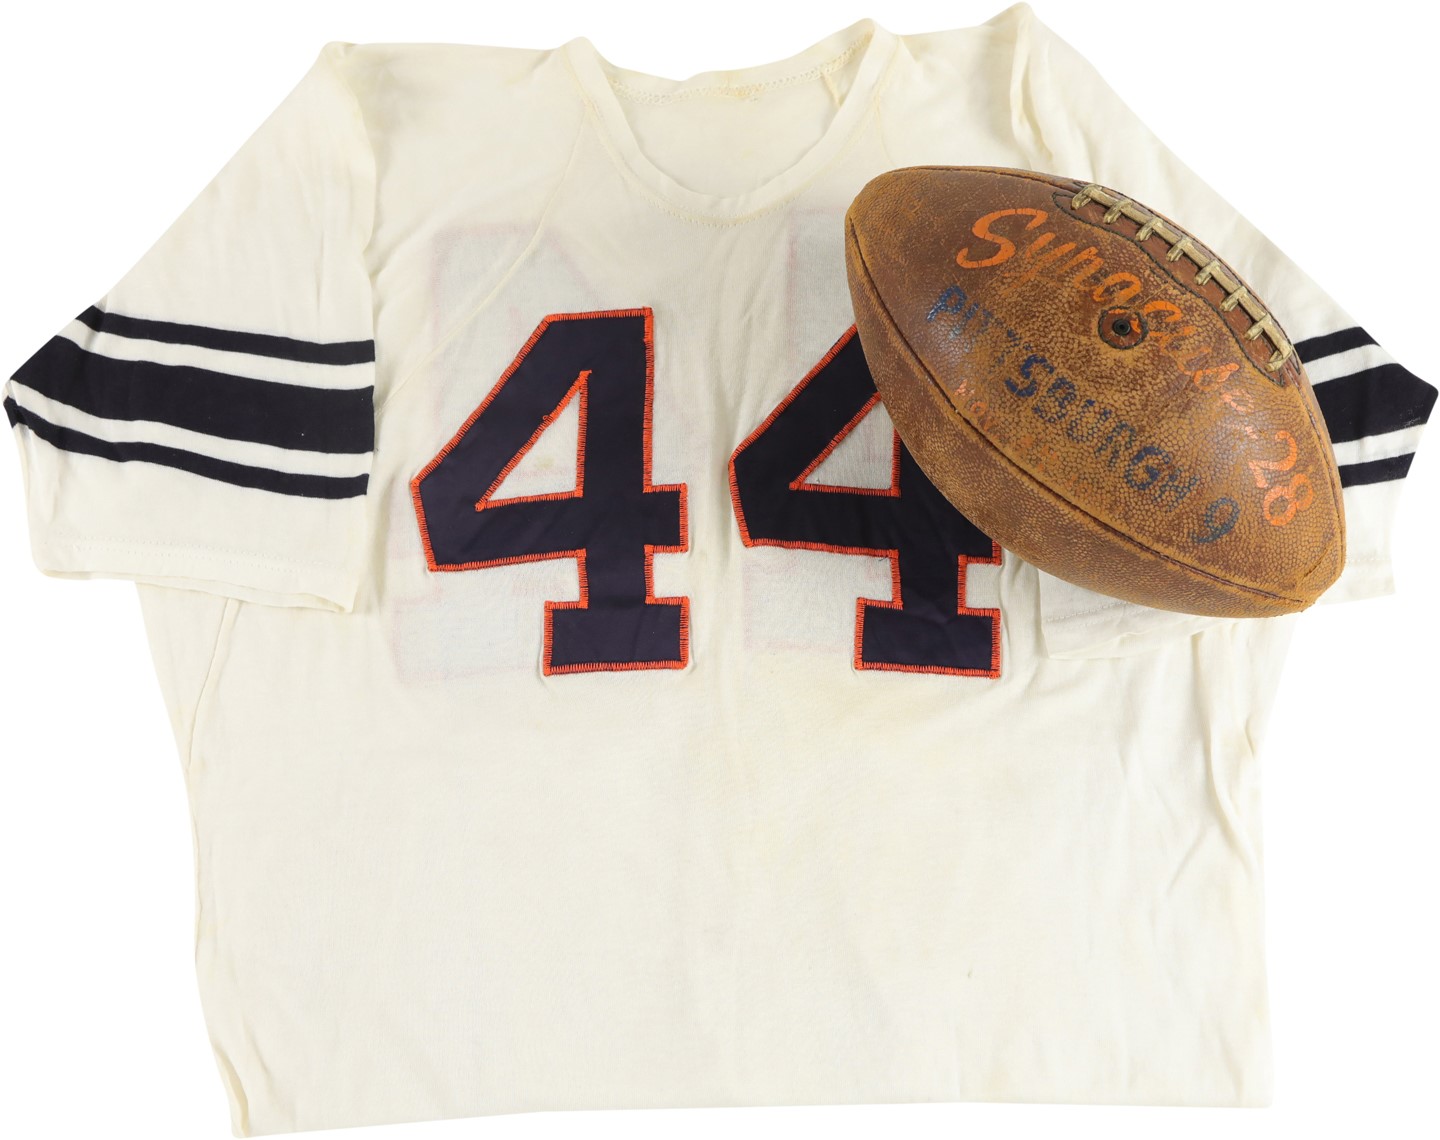 Syracuse Football Archive - 11/4/1961 Ernie Davis Syracuse vs. Pittsburgh Game Worn Jersey and Game Ball - Heisman Trophy Season (Gifted Directly by Ernie Davis with Photo Proof)